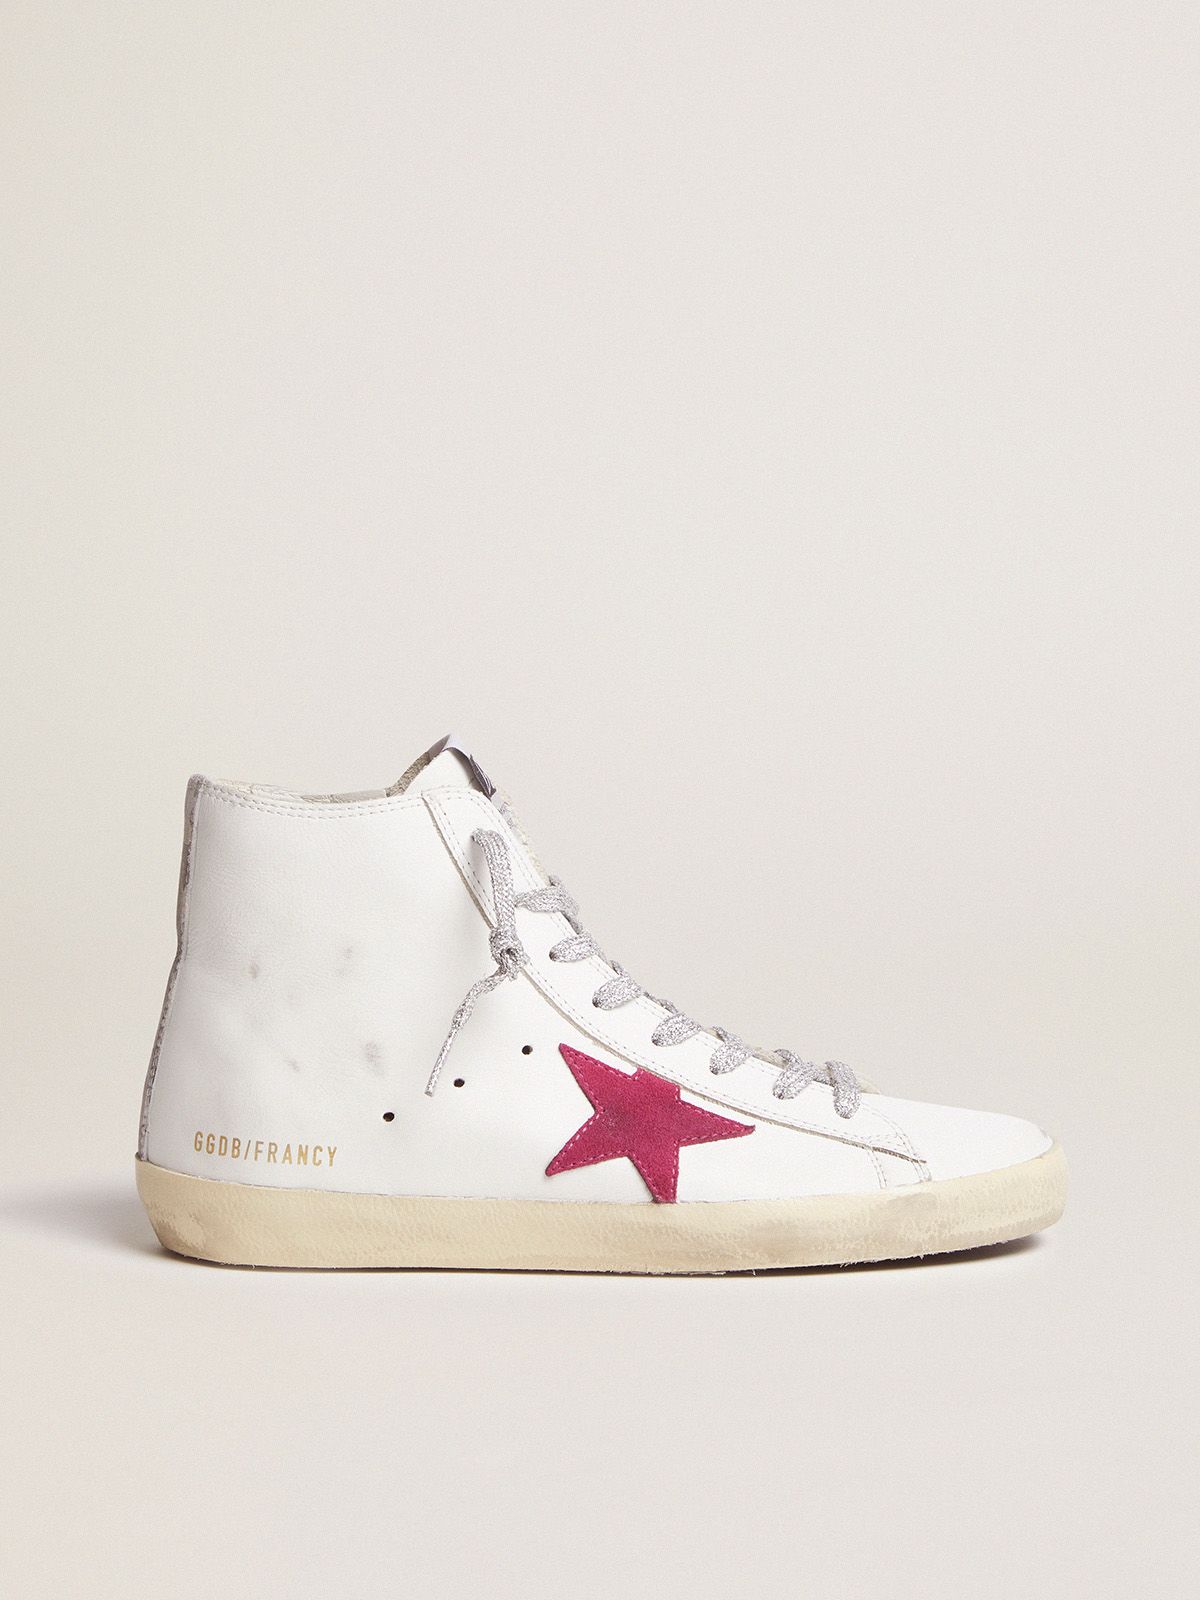 golden goose with sneakers and camouflage star red Francy insert